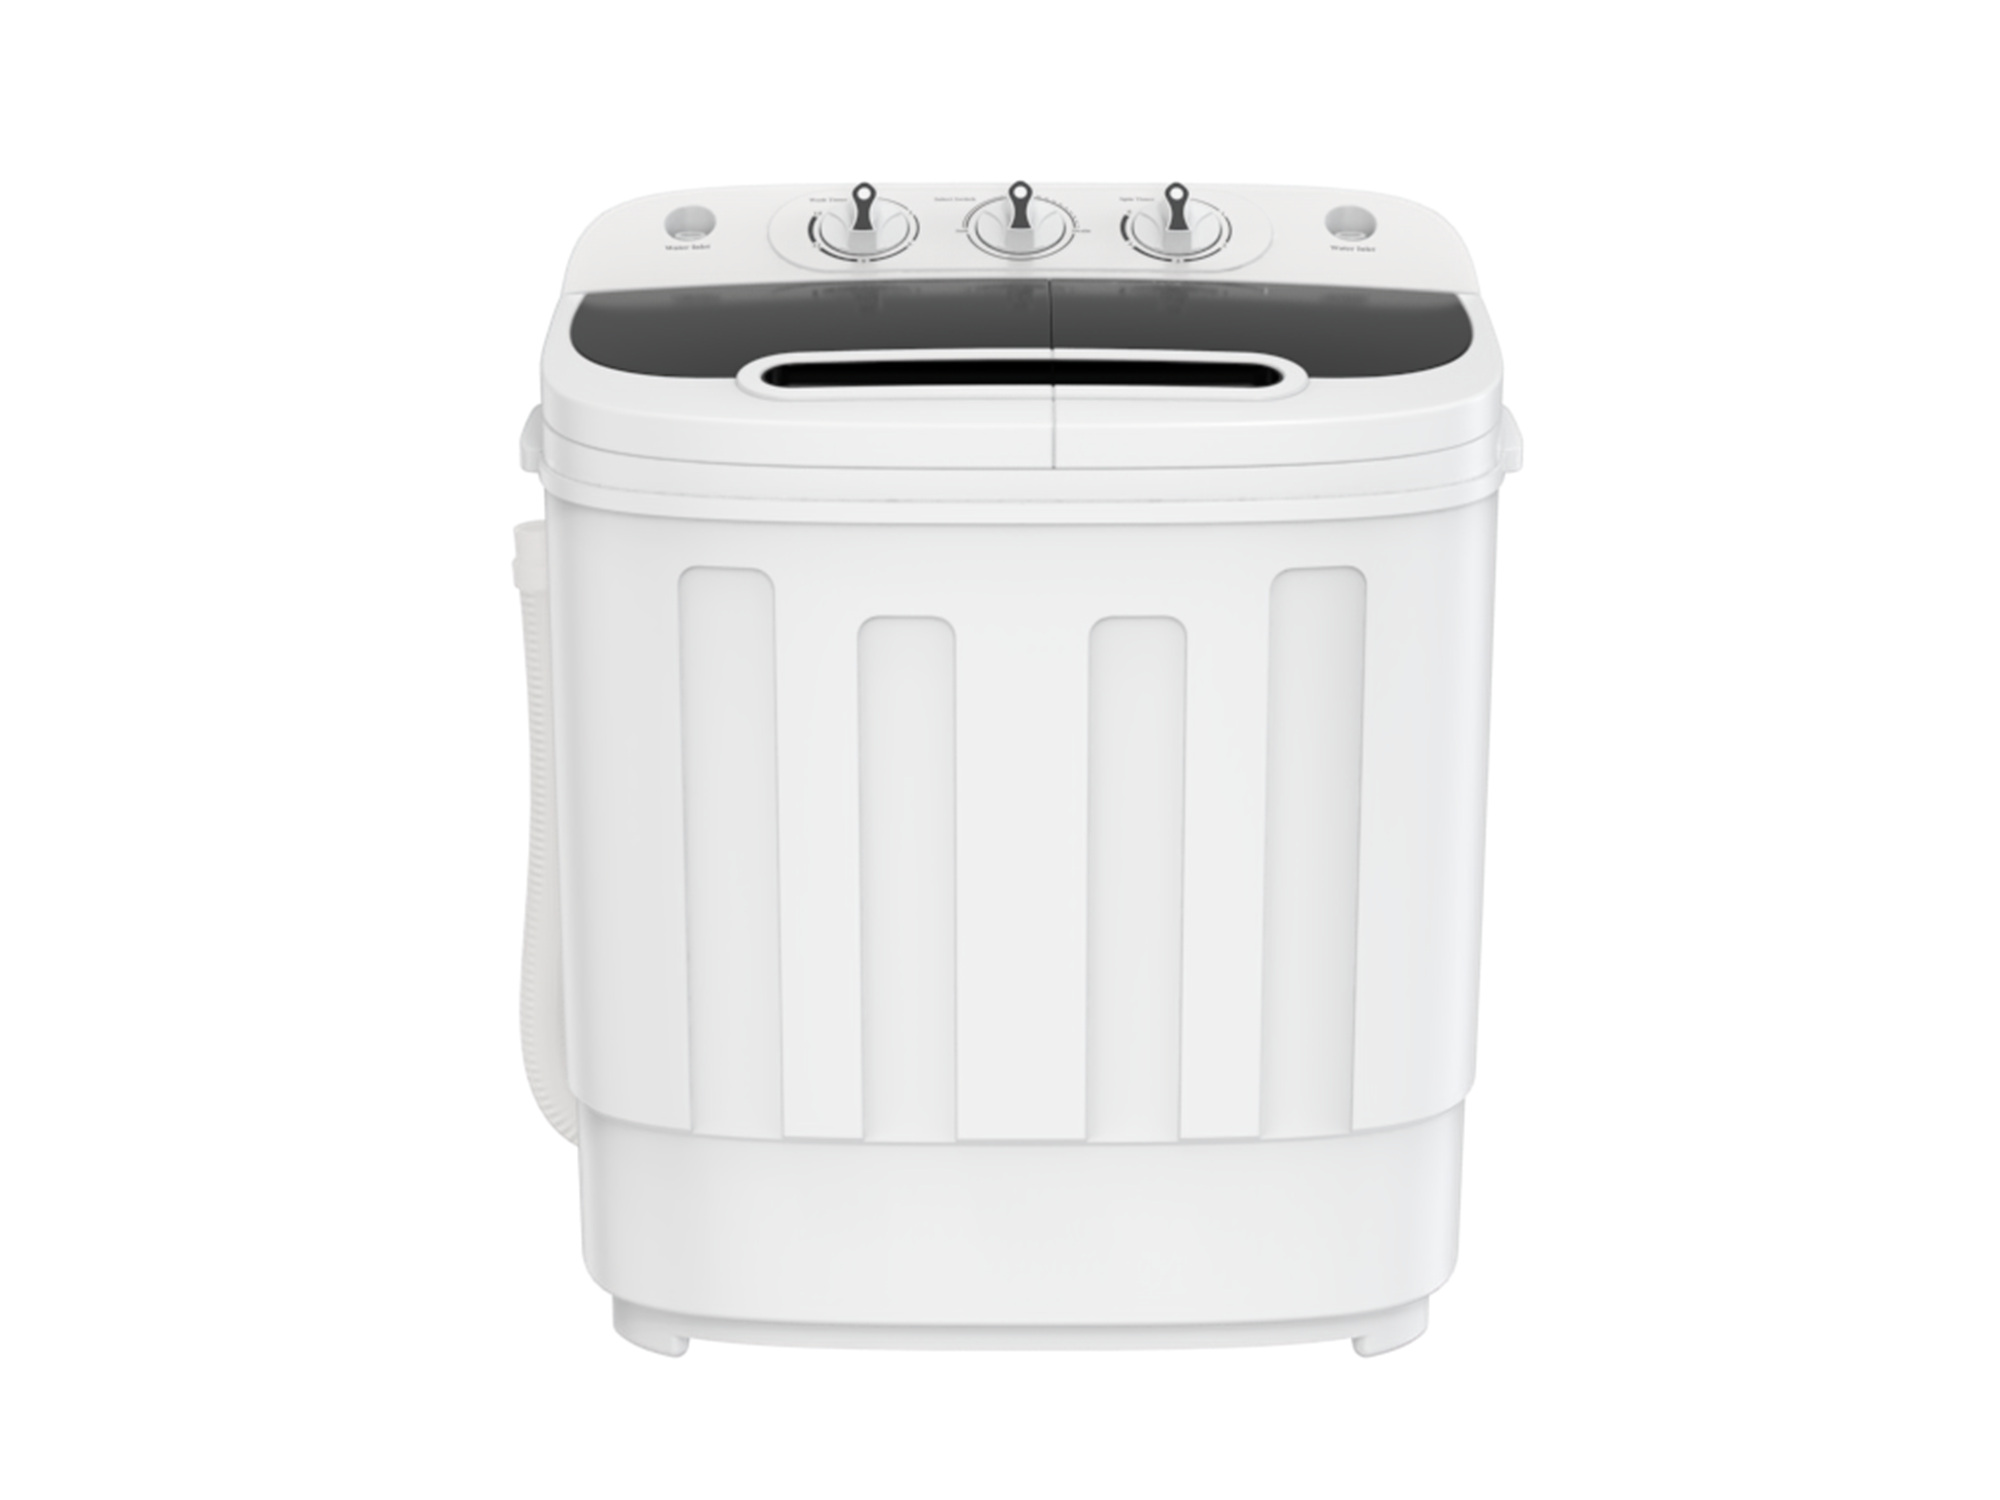 ZENY Mini Twin Tub Portable Compact Washing Machine Washer Spin Dry Cycle  13lbs Capacity｜TikTok Search